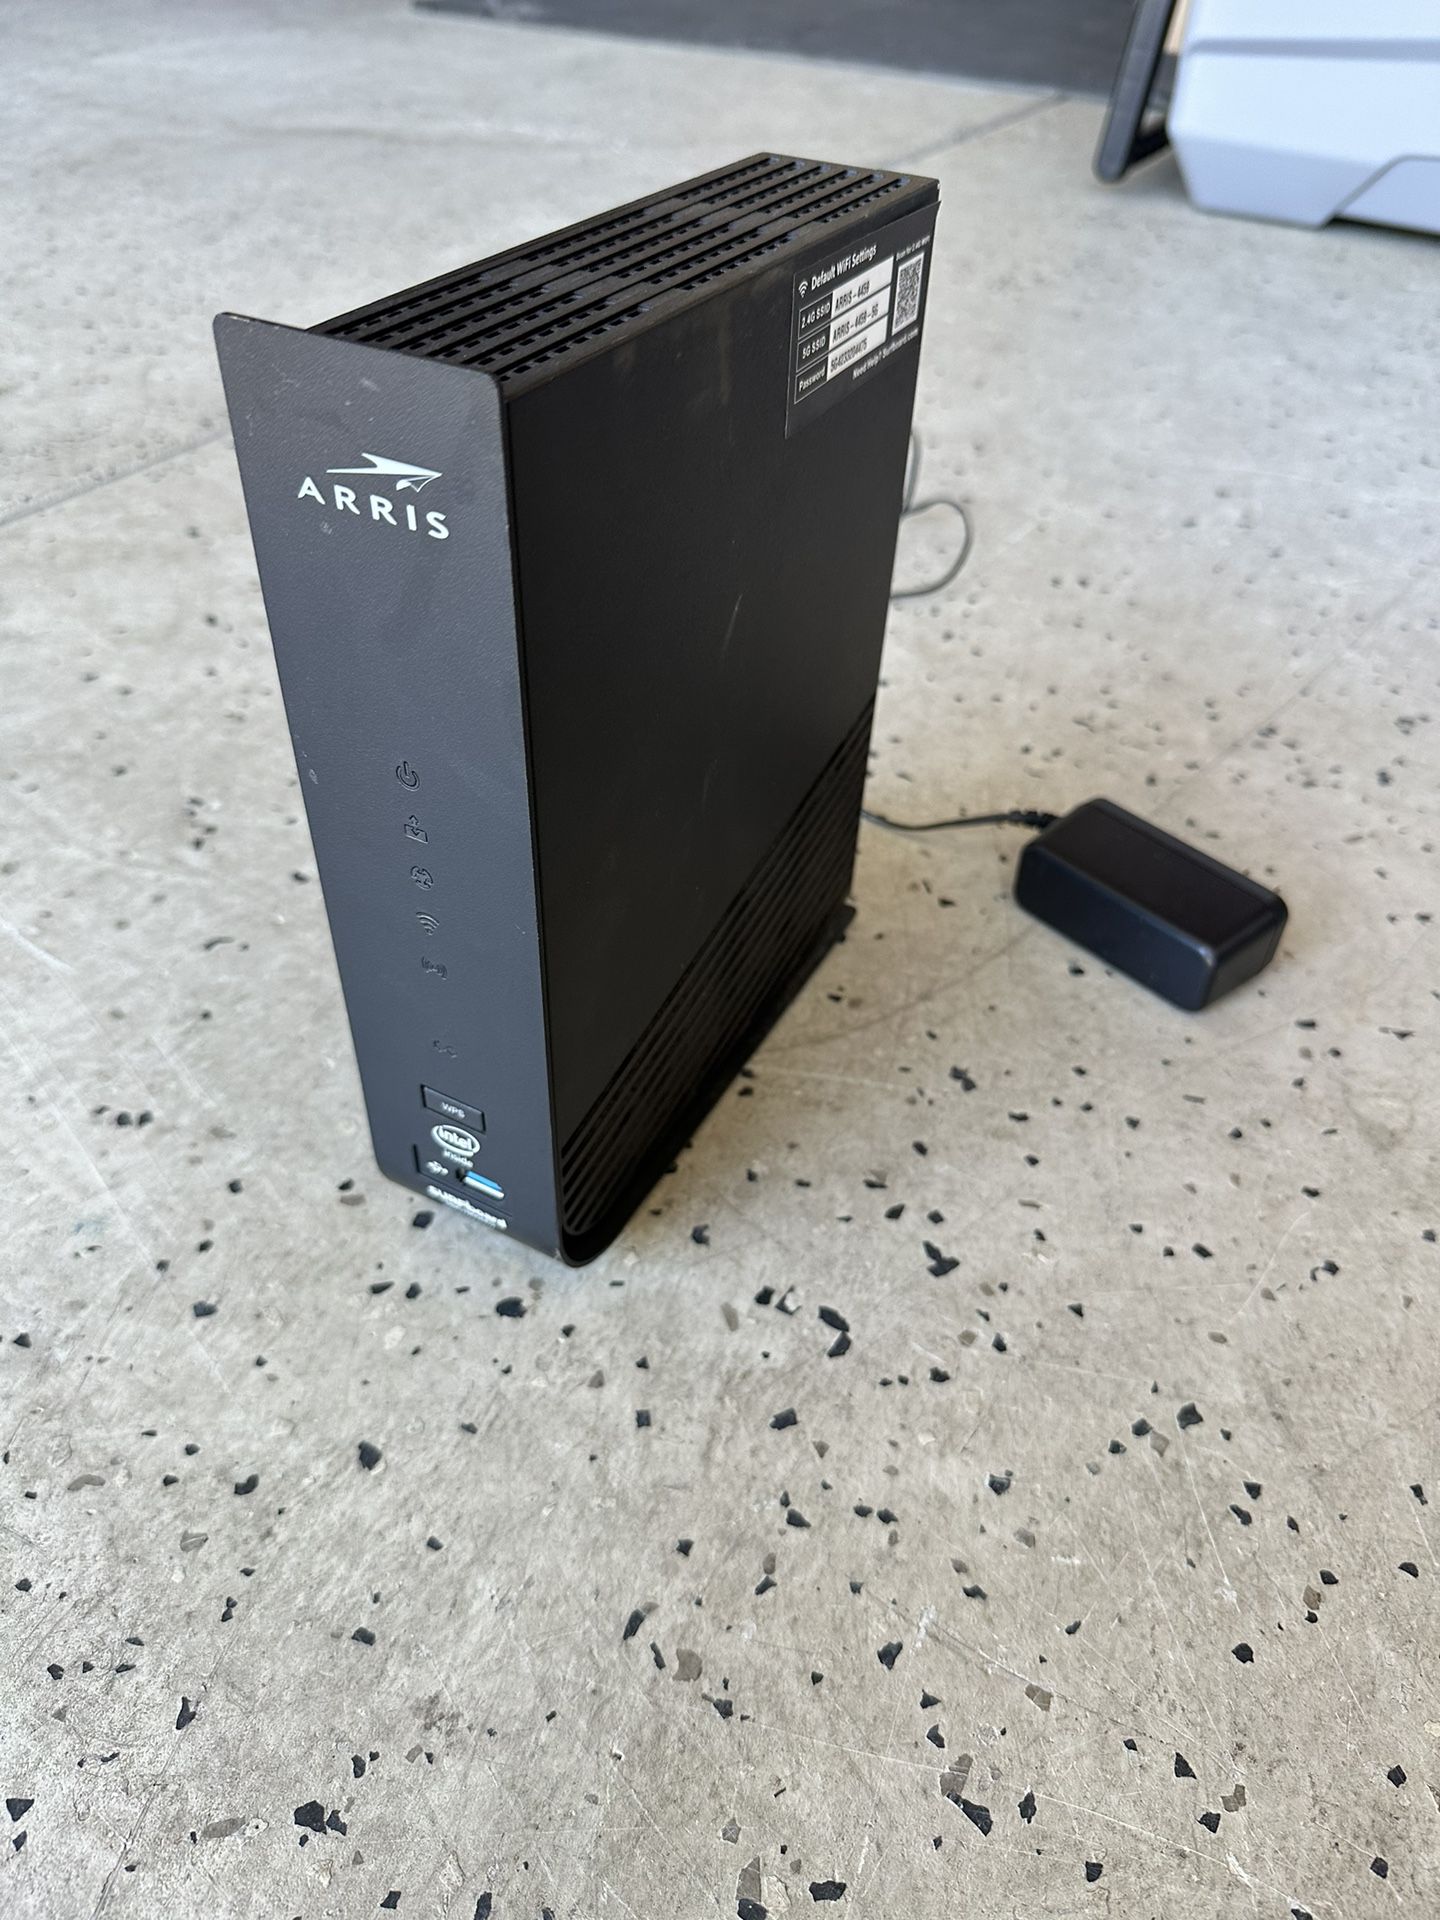 Arris Modem and Router